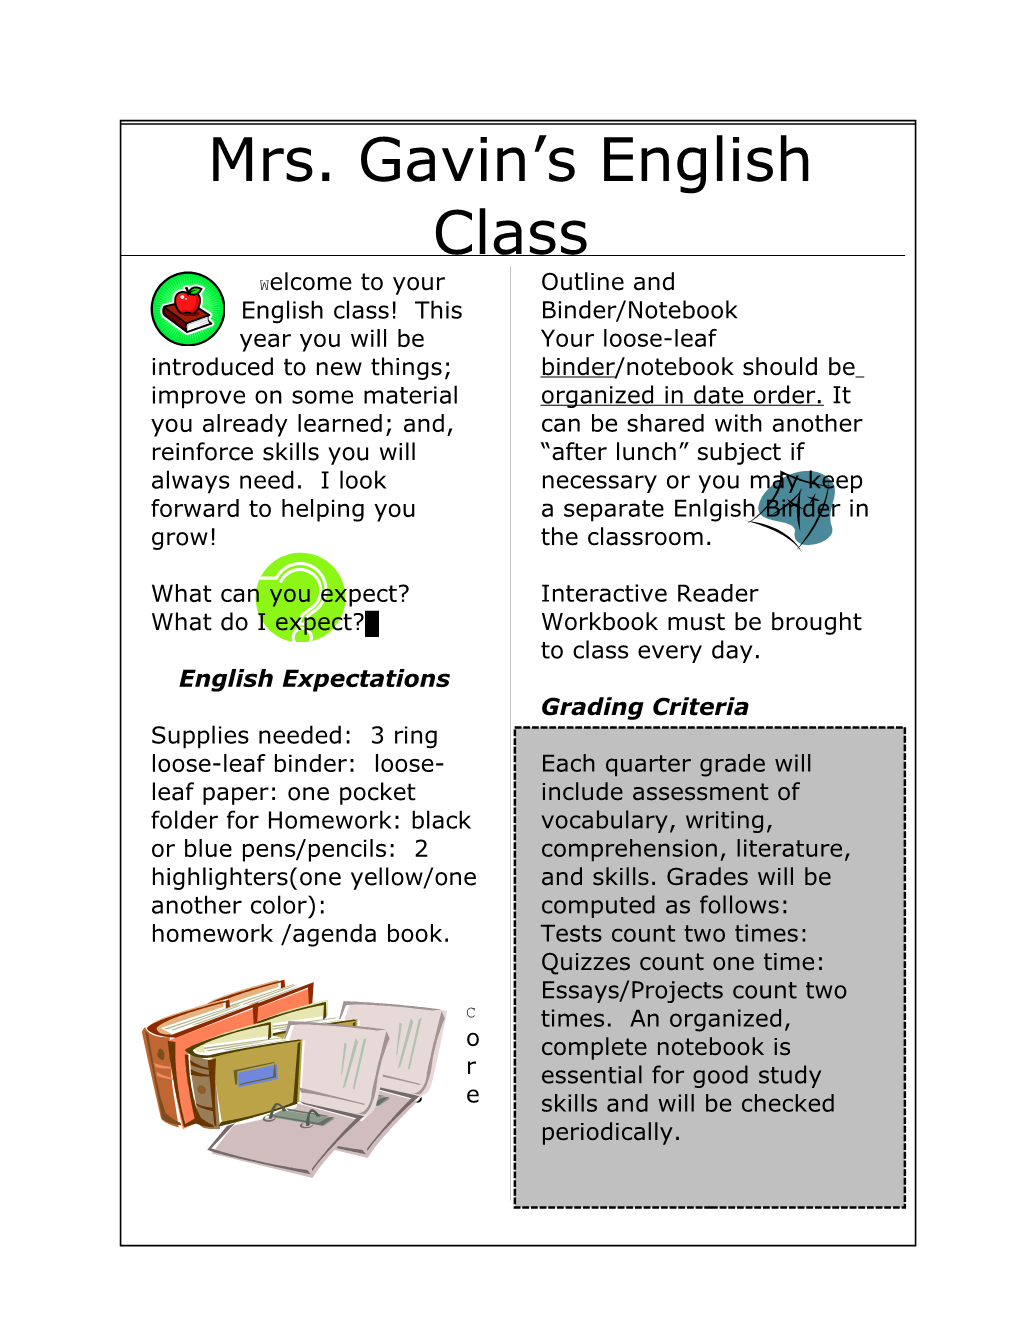 English Class Guidelines and Expectations